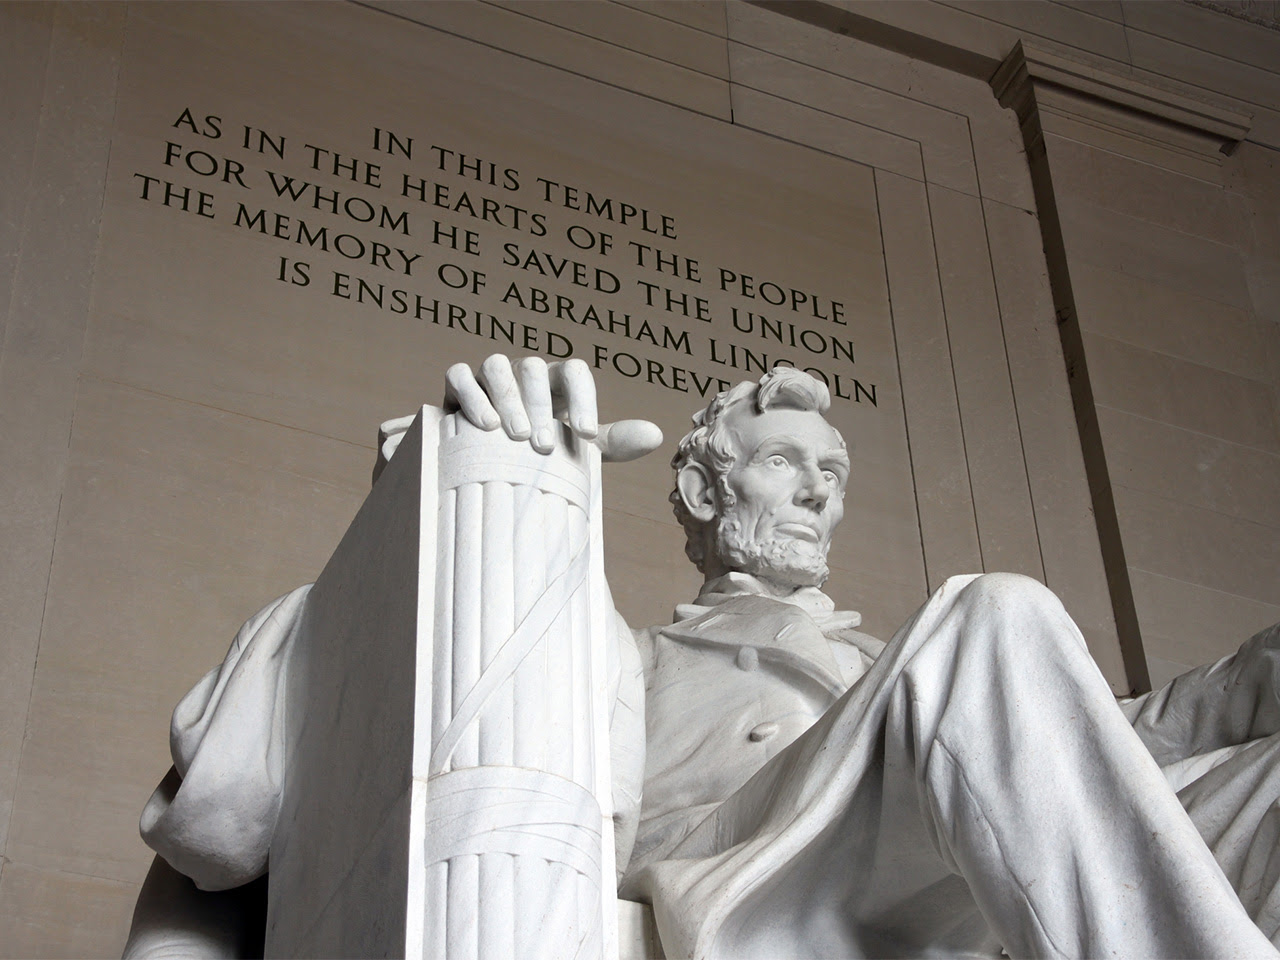 Looking up at the sculpture of Abraham Lincoln at the Lincoln Memorial